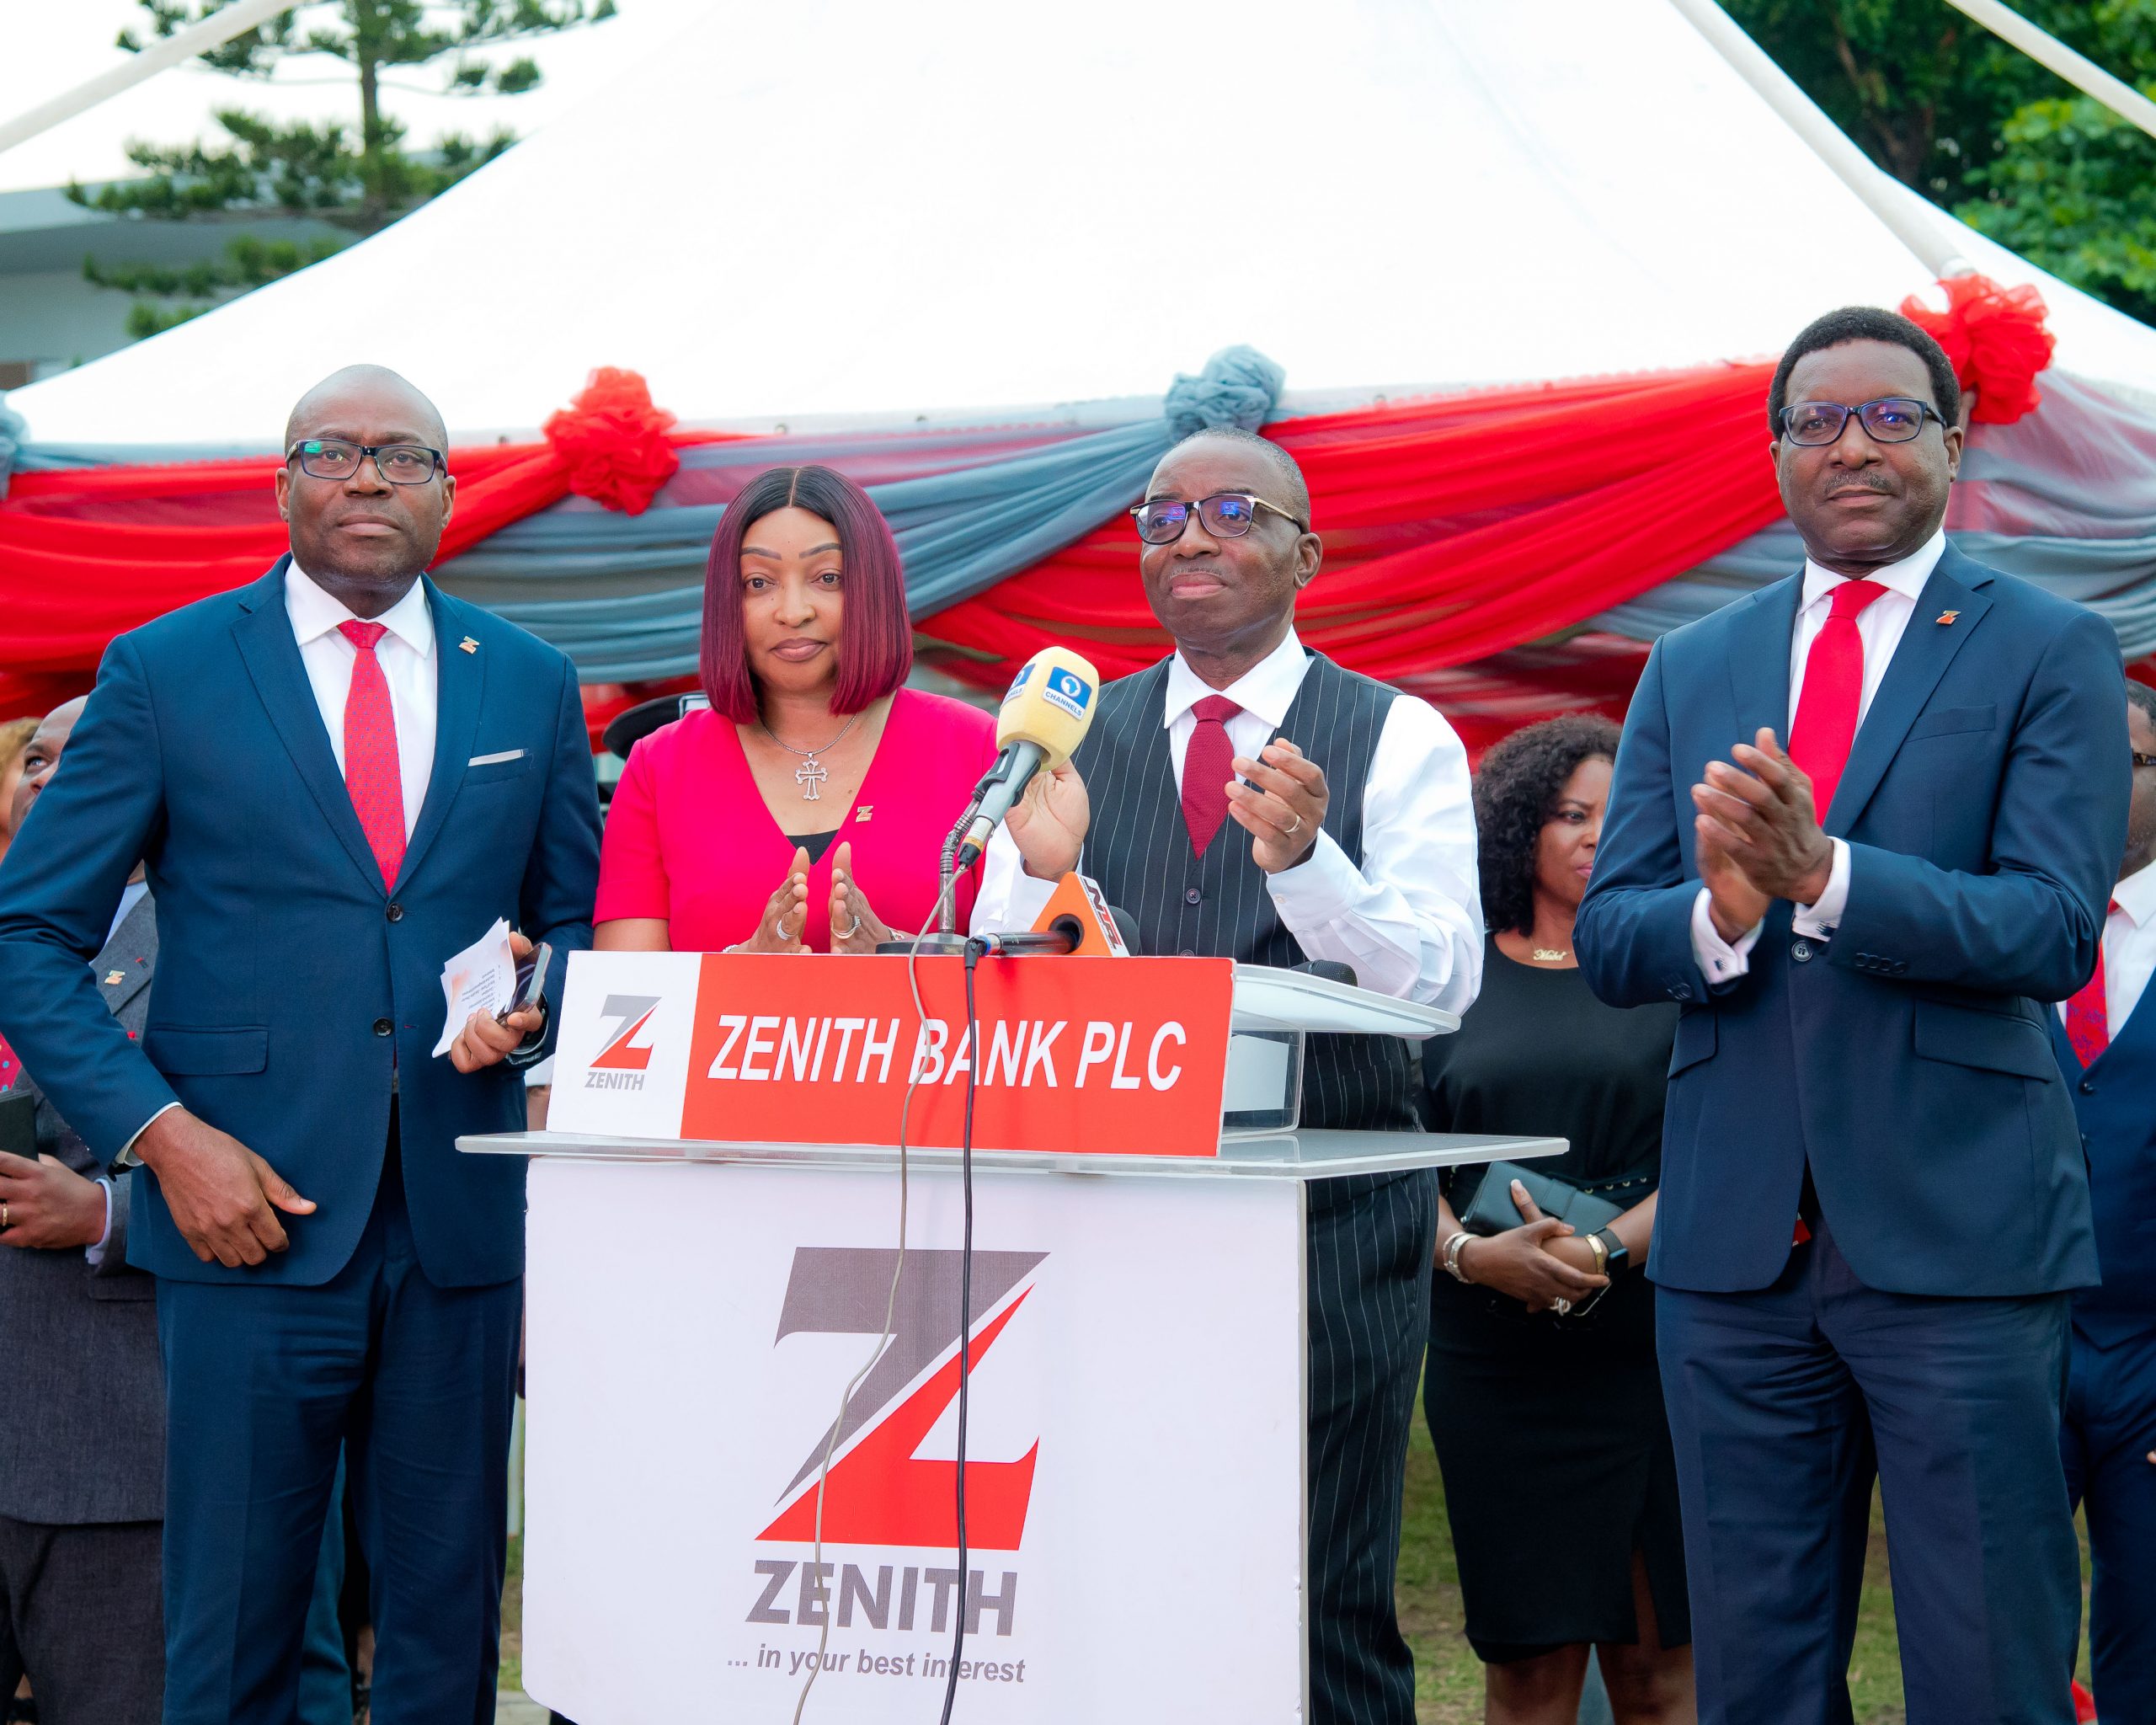 ZENITH BANK LAUNCHES STATE-OF-THE-ART DIGITAL SCREEN AT AJOSE ADEOGUN ROUNDABOUT